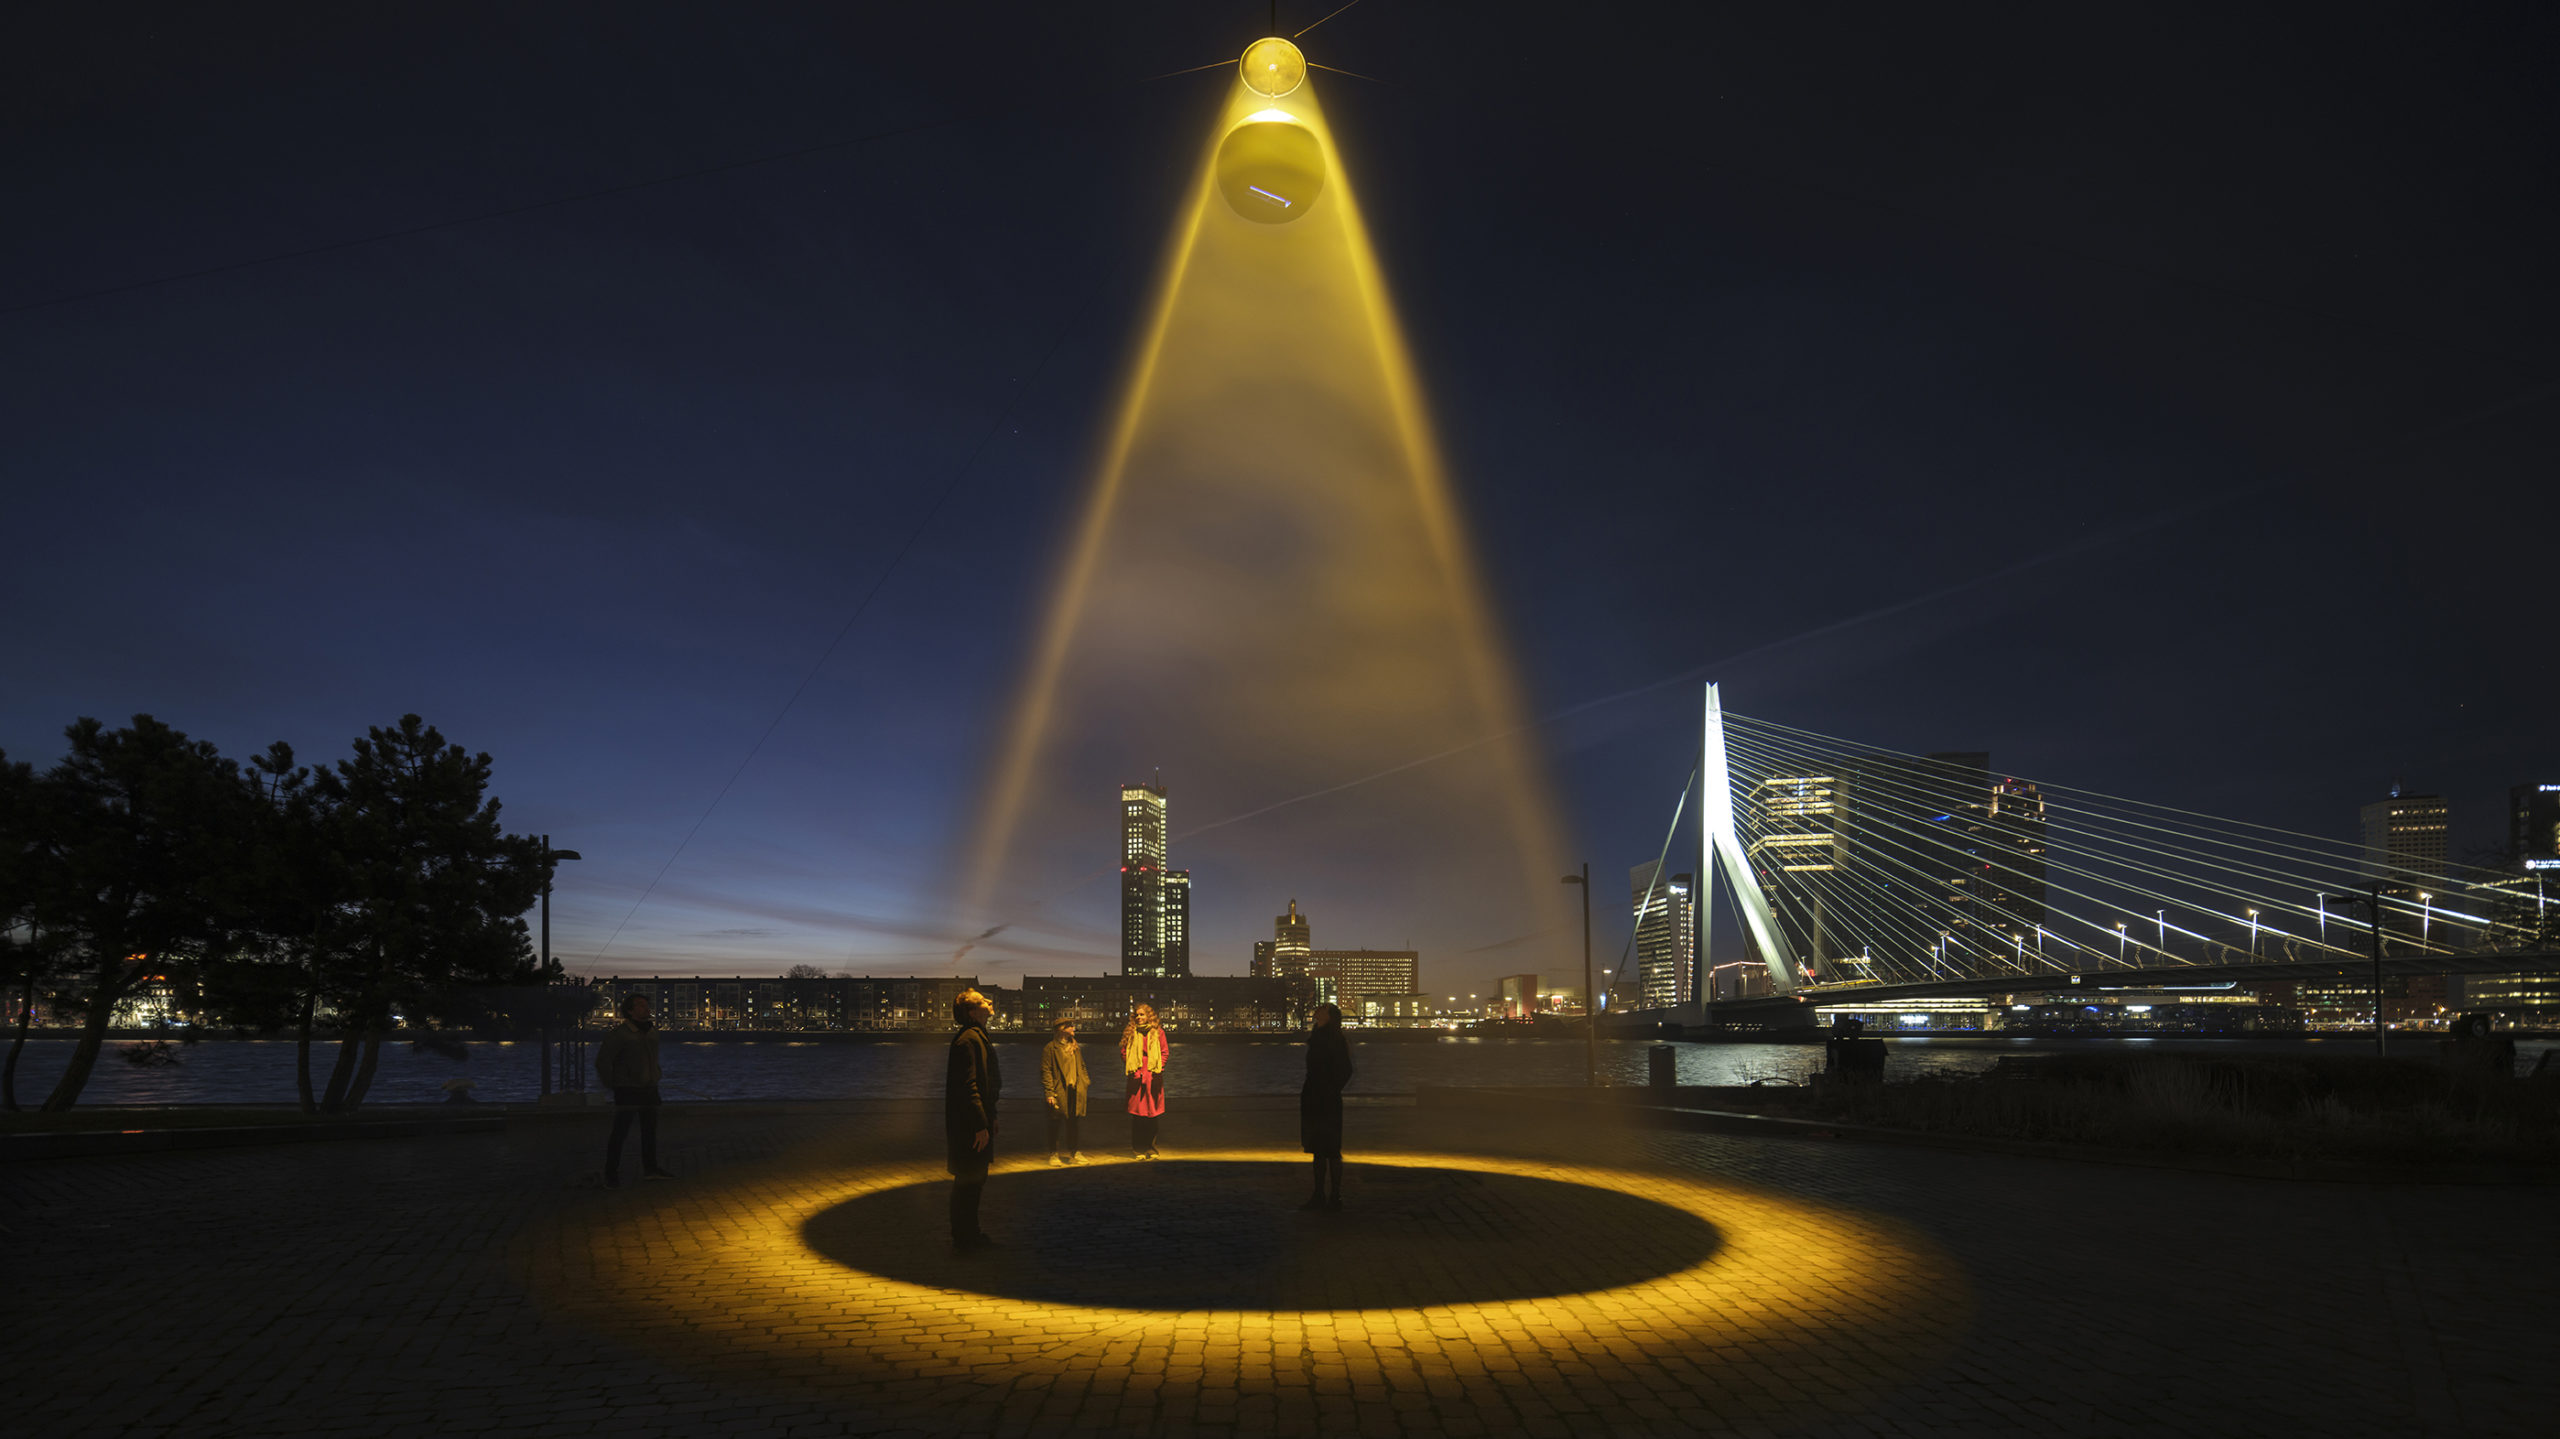 A night-time photograph of a public space with a high suspended light source which illuminates a large yellowish open circle on the paved surface below.